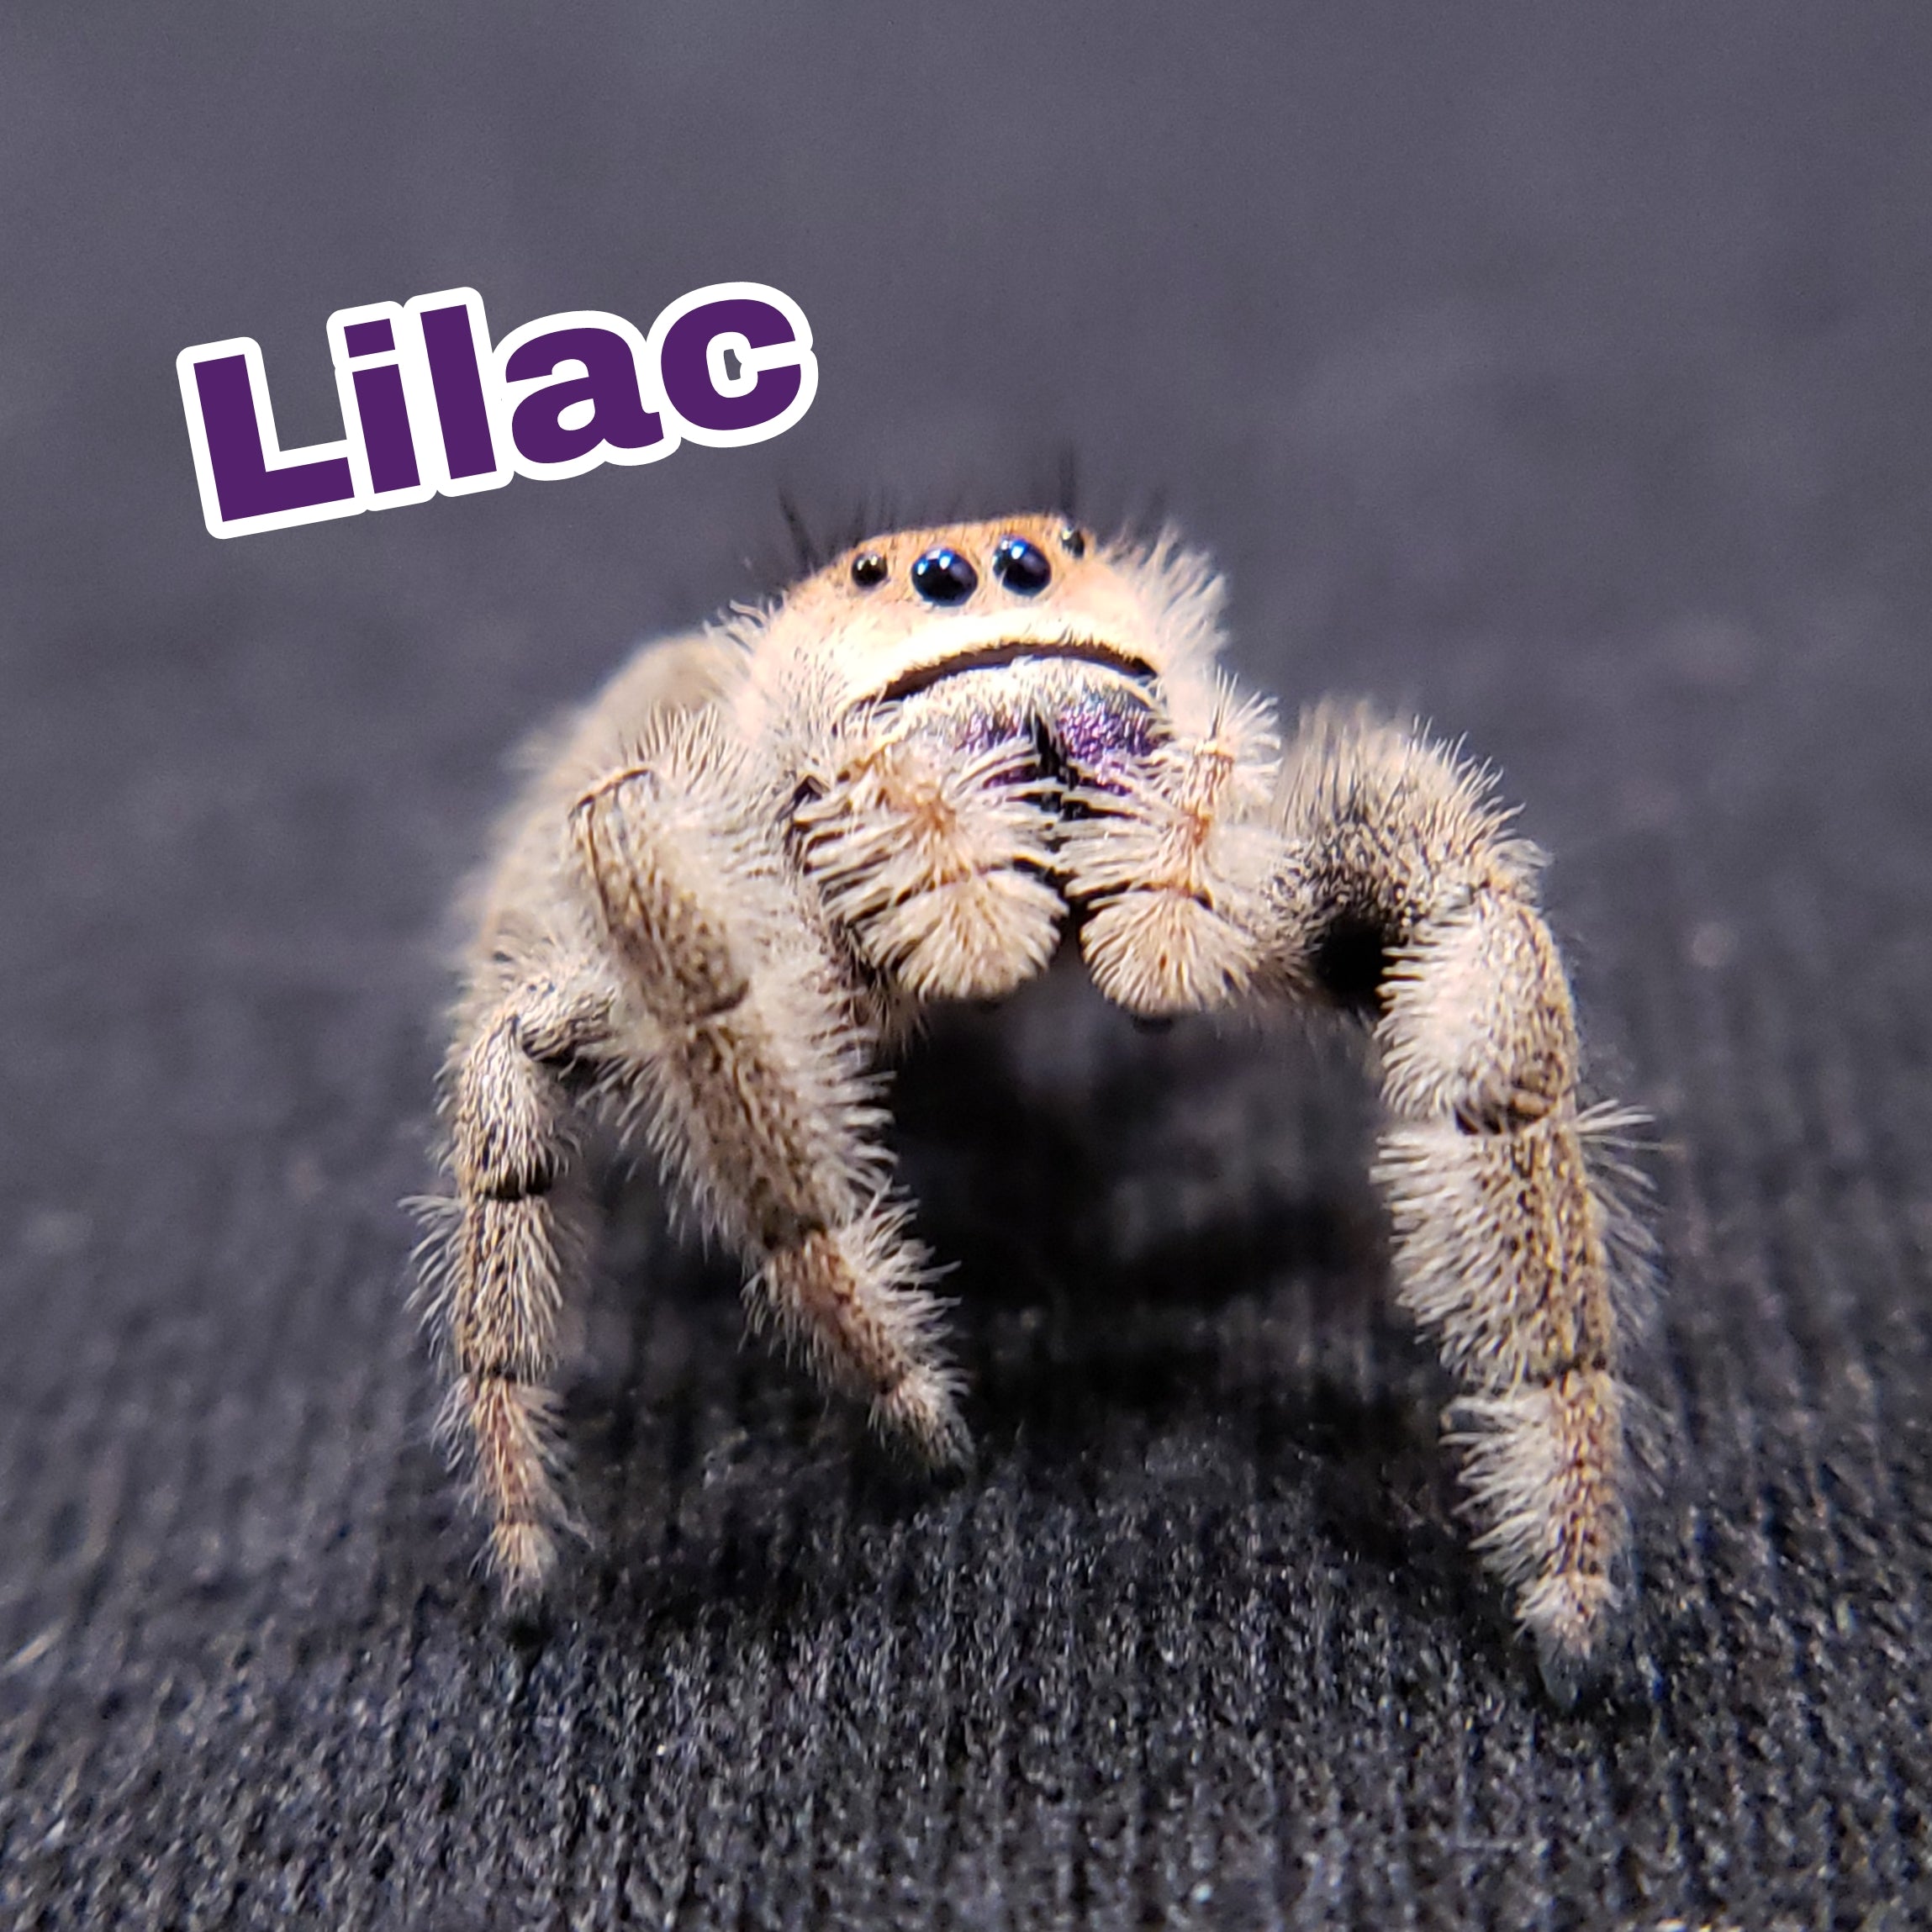 Peach Regal Jumping Spider - Jumping Spiders For Sale - Spiders Source - #1 Regal Jumping Spider Store